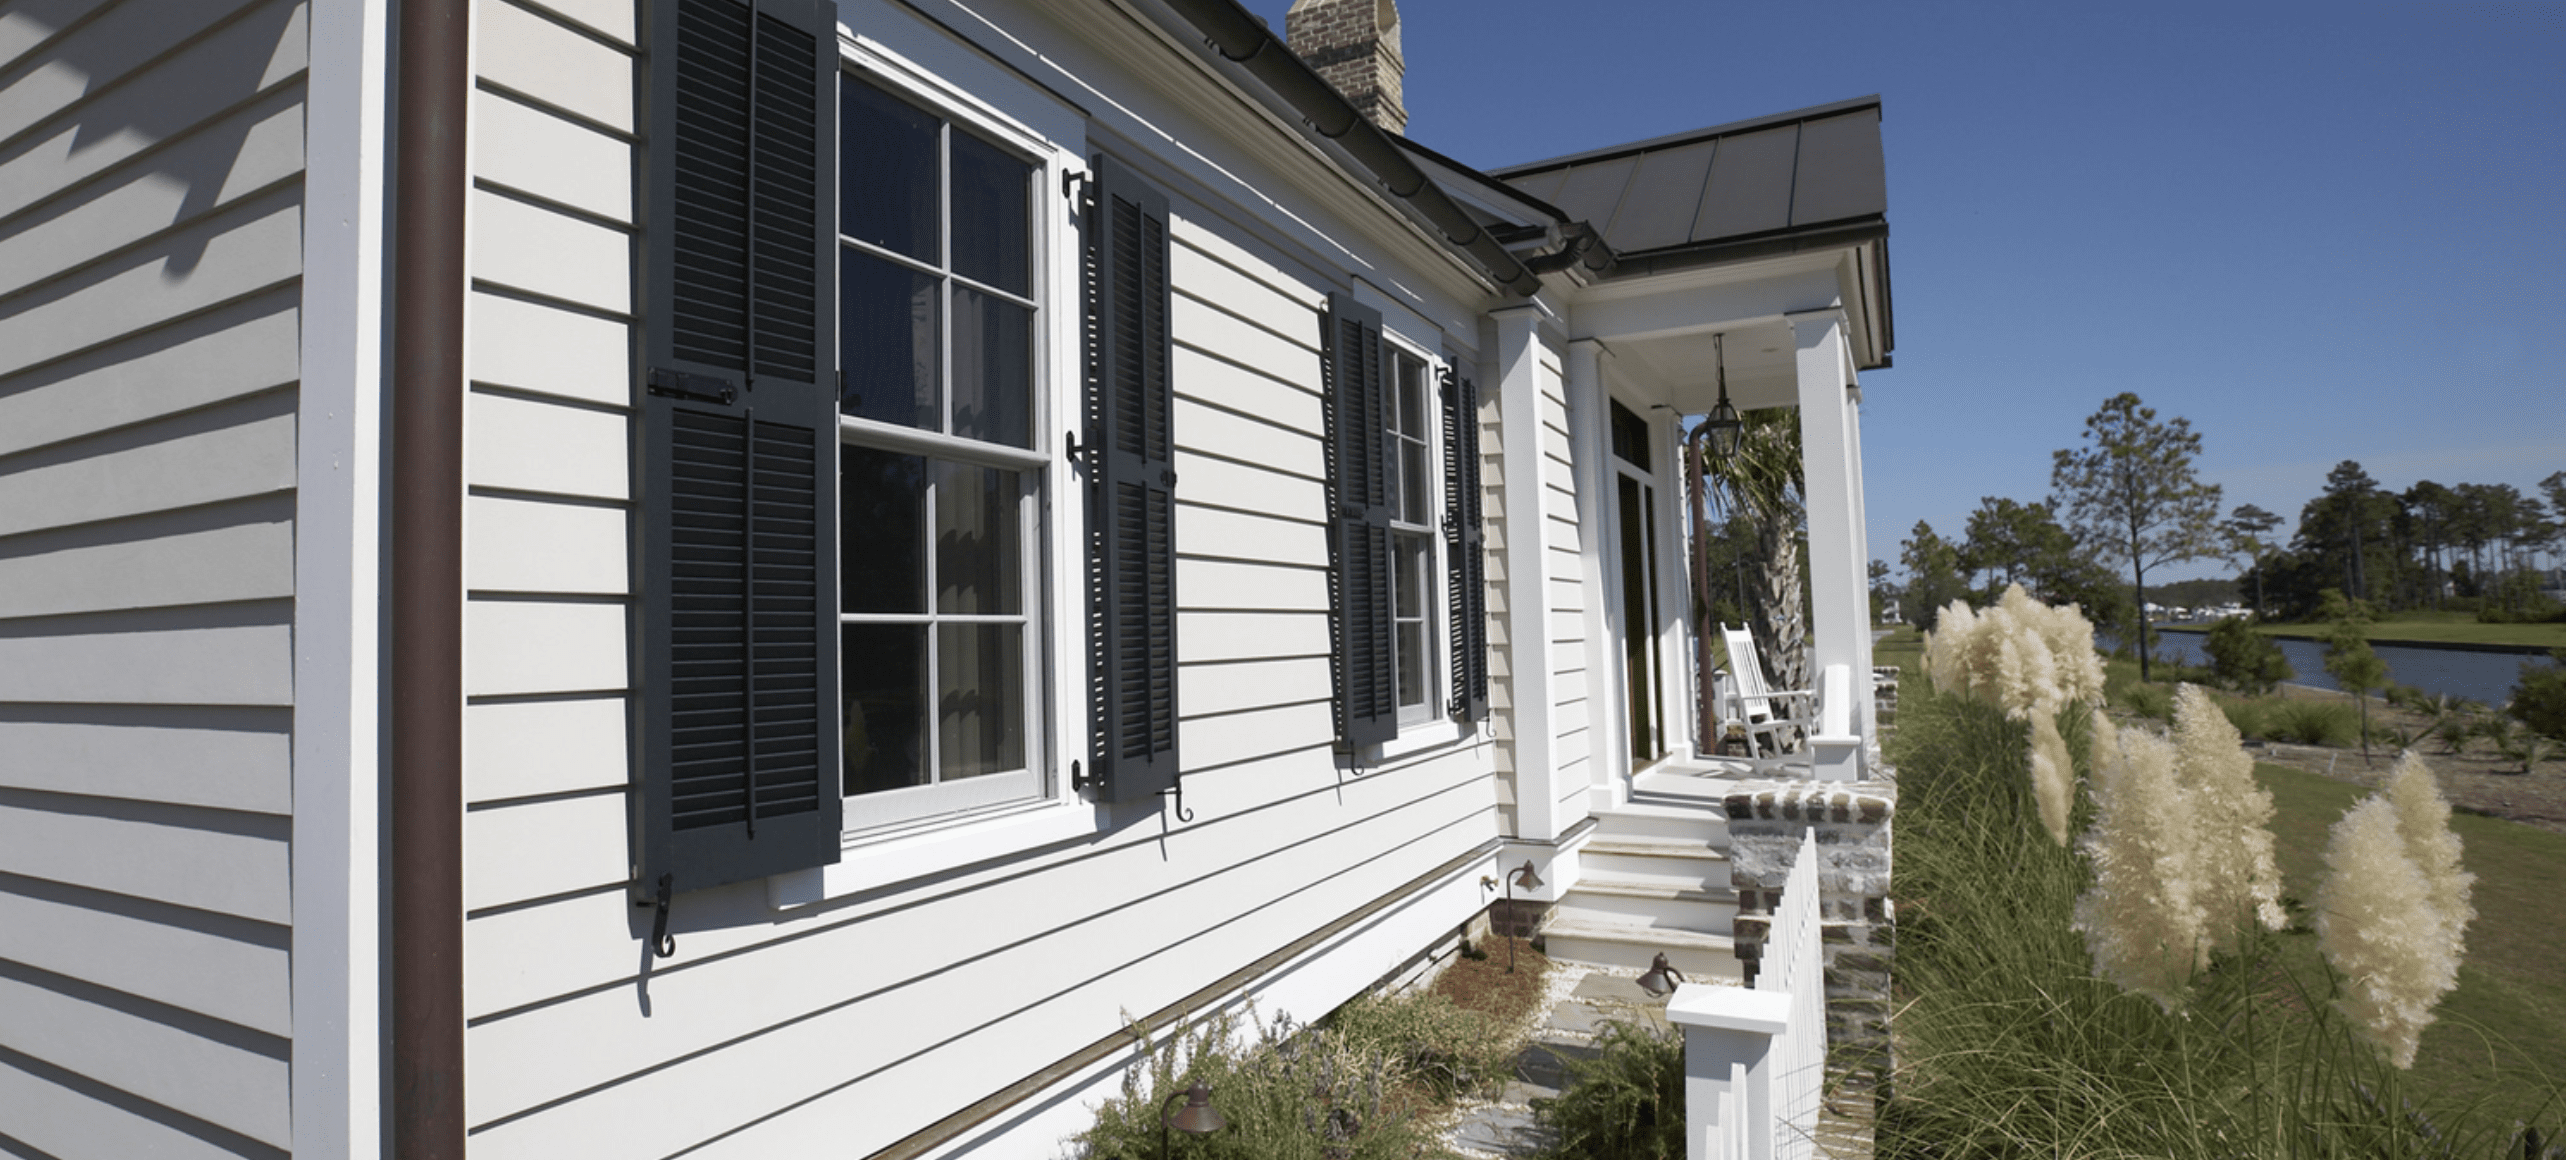 James Hardie ColorPlus® Siding Technology: Benefits, Comparisons, And More